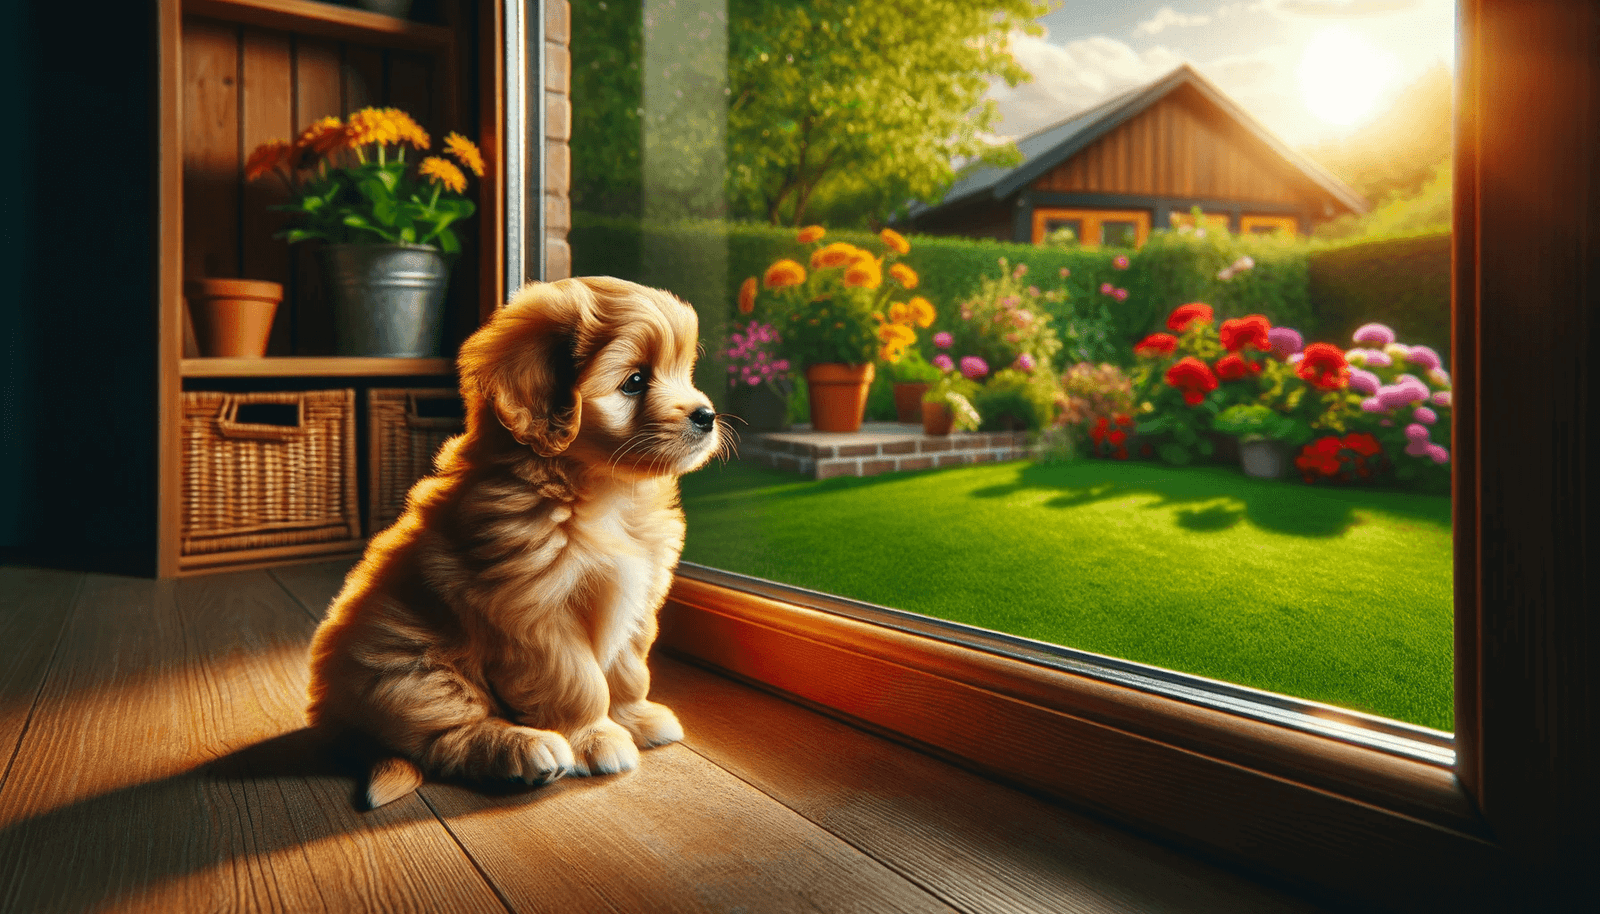 A small, fluffy golden puppy sits inside a house, gazing longingly out of a large, clear window. The window offers a view of a sunny garden with vibrant flowers and a lush green lawn. The puppy's expression is one of longing and mild sadness, embodying the emotion of separation. The indoor setting is cosy, with warm, natural lighting enhancing the poignant atmosphere